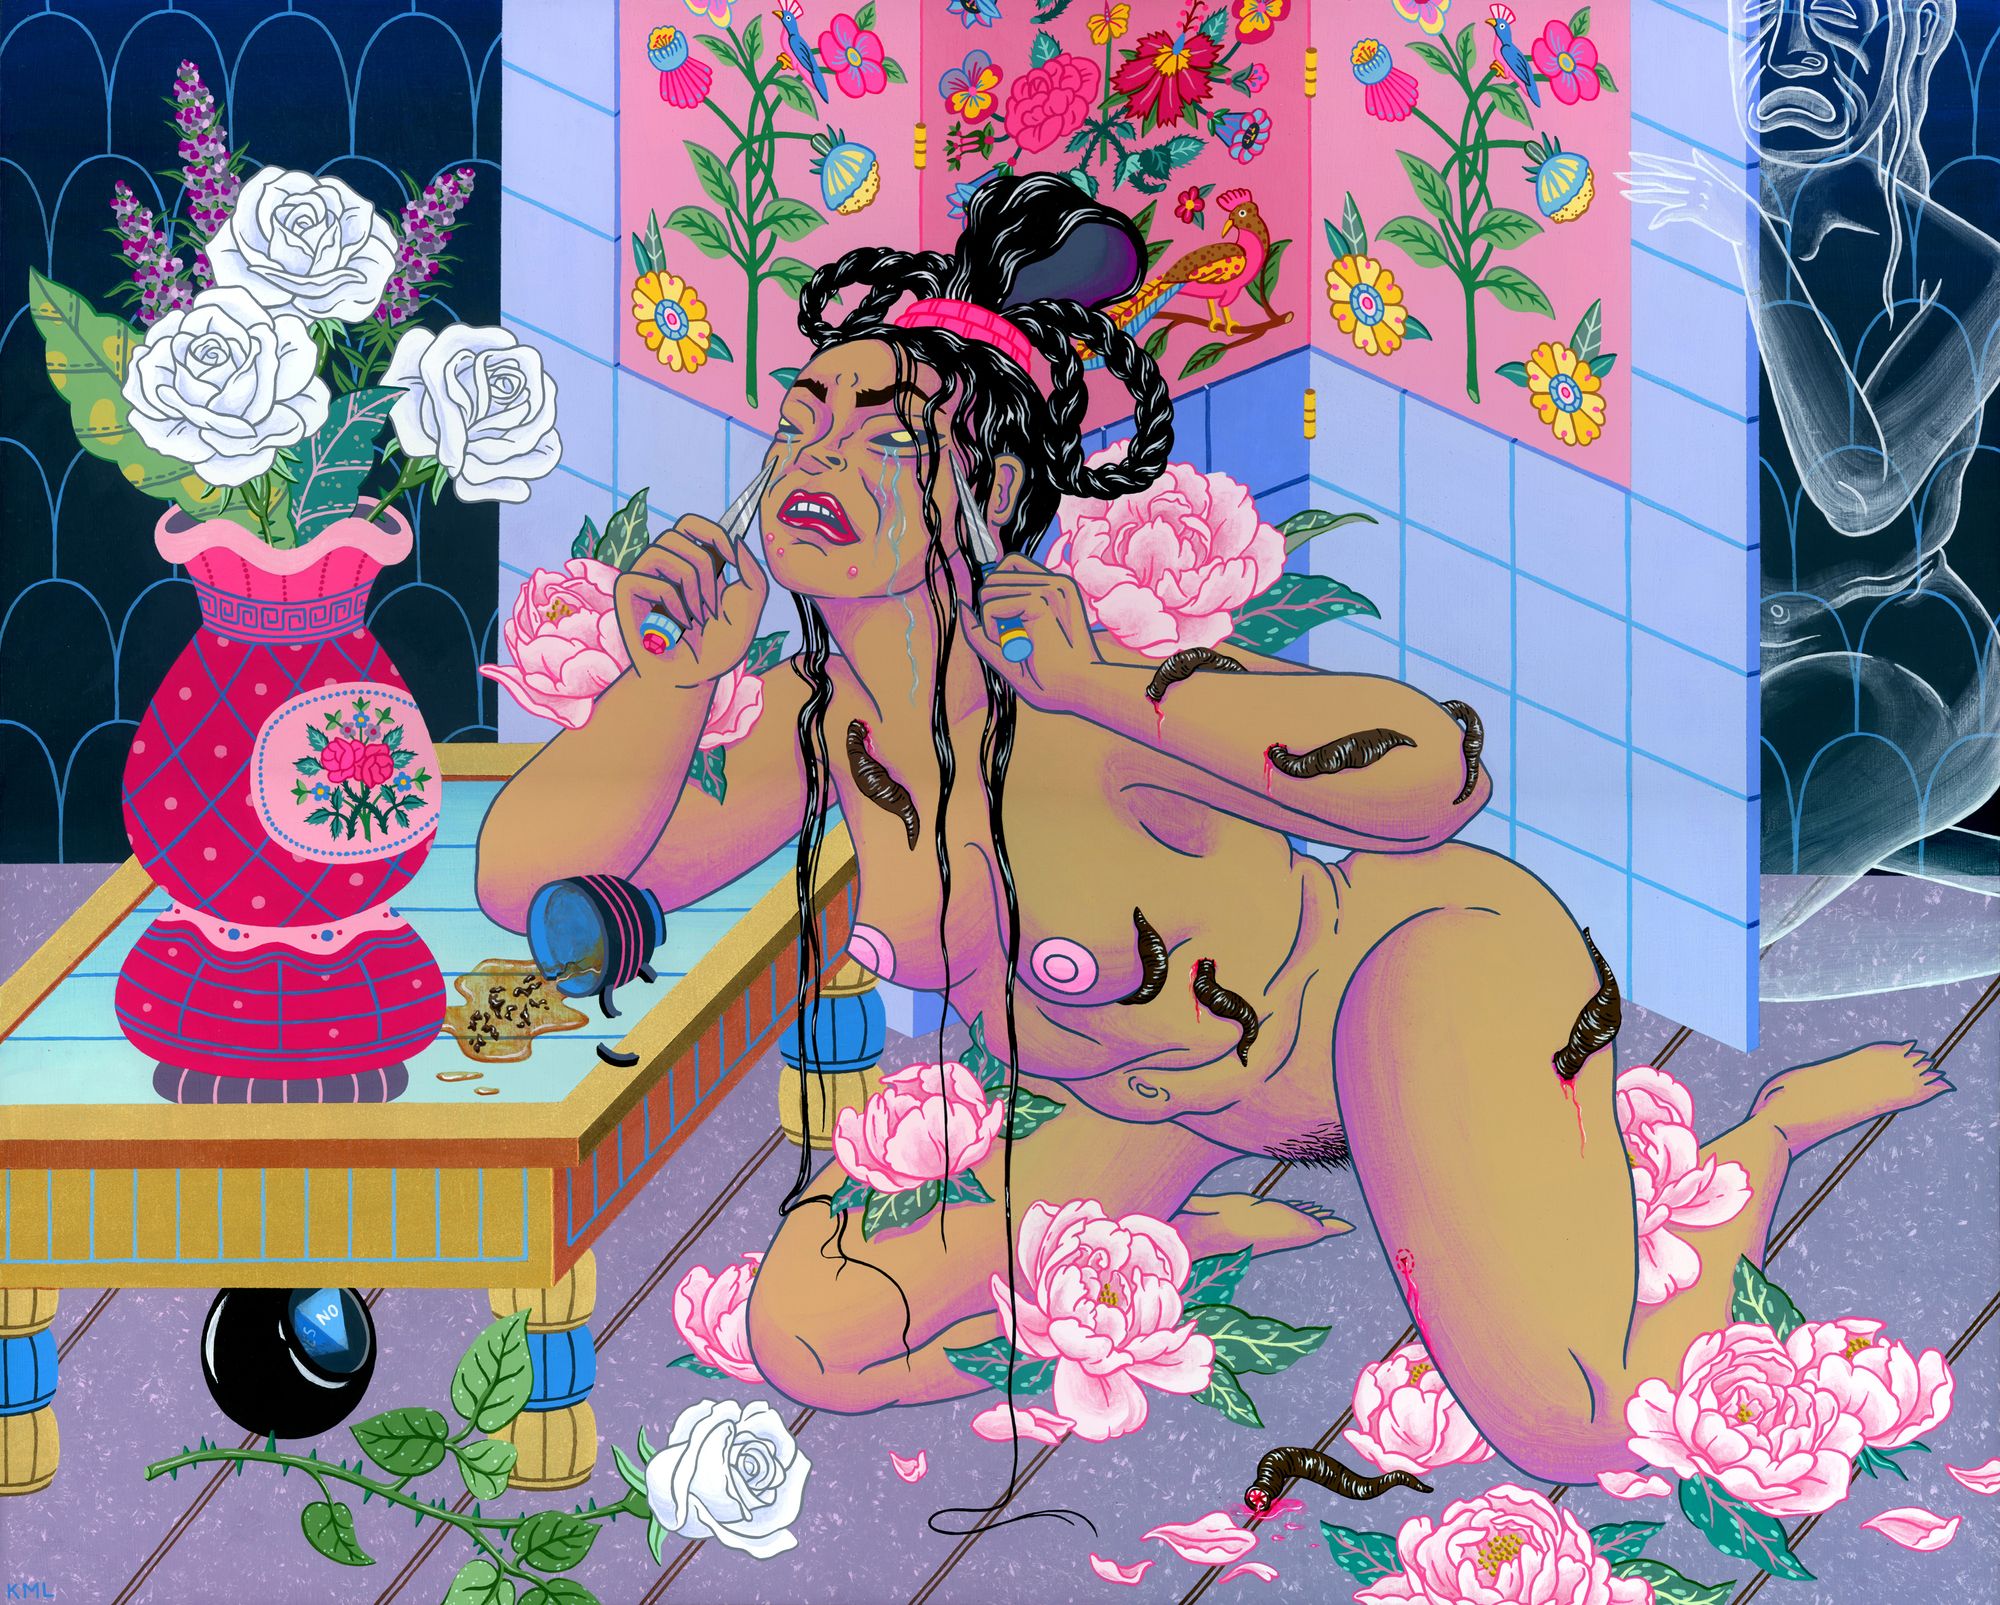 Painter and illustrator Kristen Liu-Wong's painting titled A Beastly Thing depicts a nude woman sitting on the ground leaning on a gilded coffee table. She is covered head to toe in leeches and surrounded by pink peony flowers.